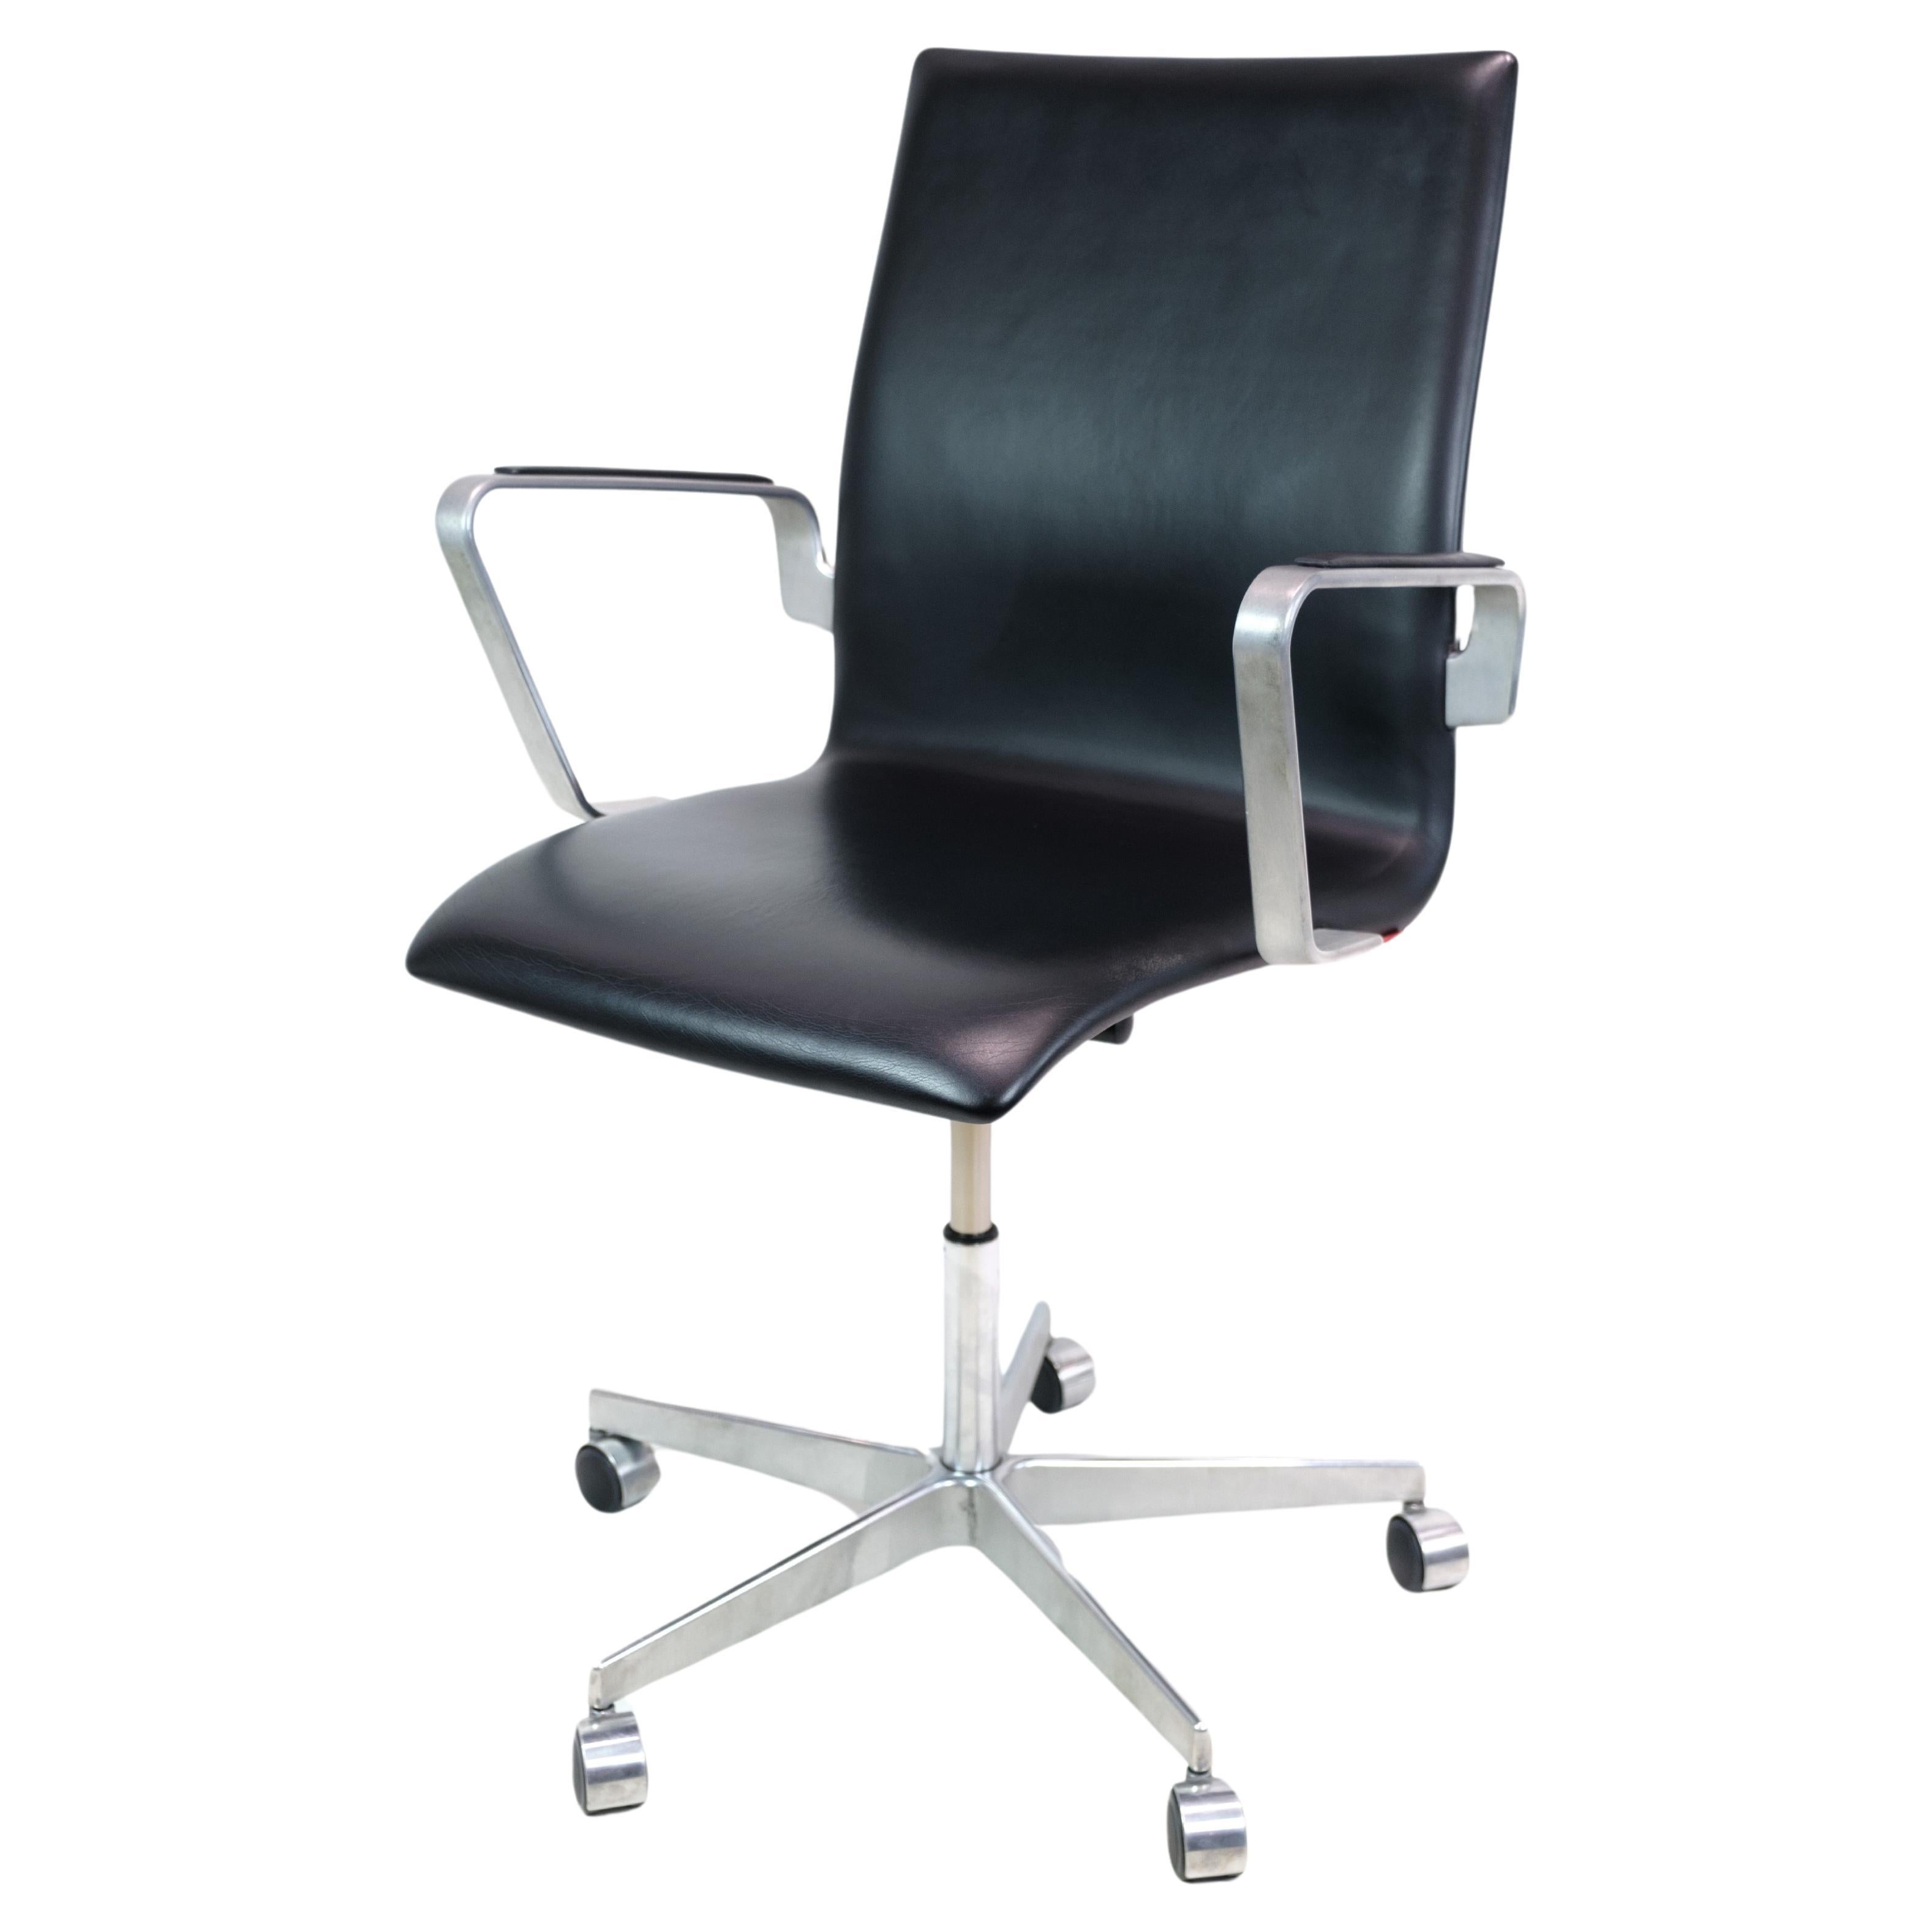 Desk chair, Model 3271W Oxford in Black Leather by Arne Jacobsen from 1980 For Sale